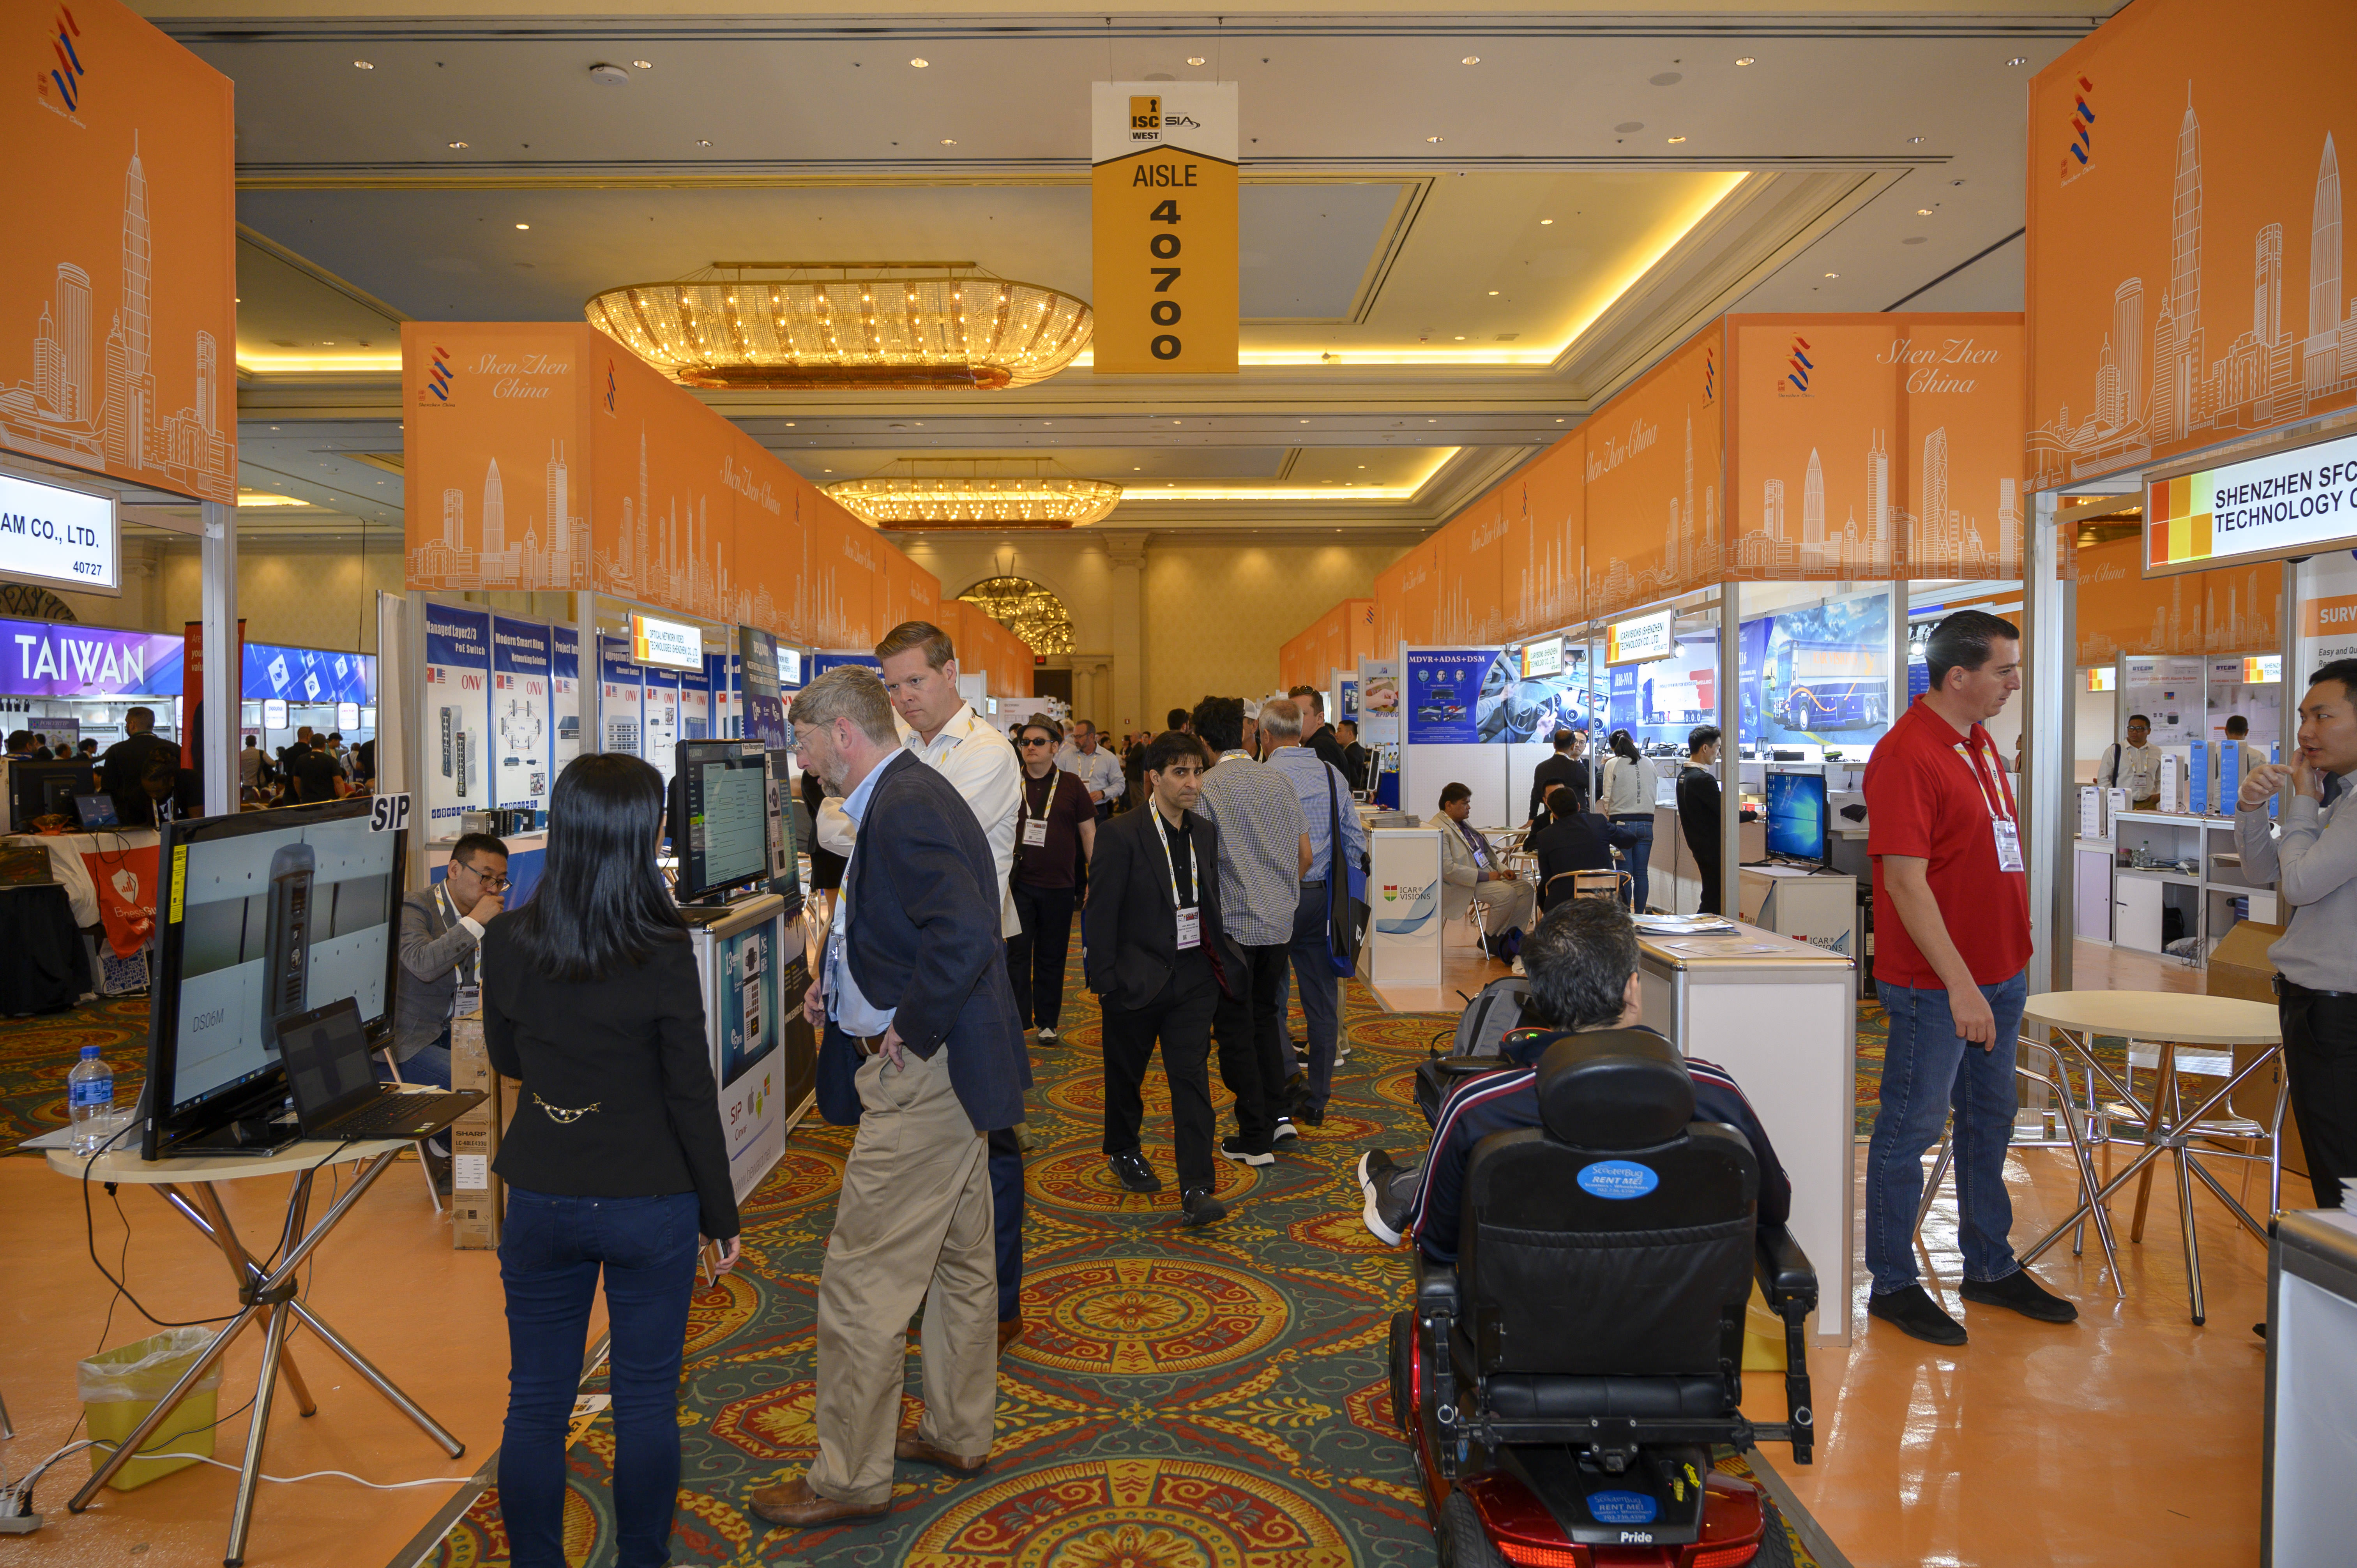 Participants and exhibitors of isc west 2019 | isc west | international security conference 2020: isc west expo [new date]